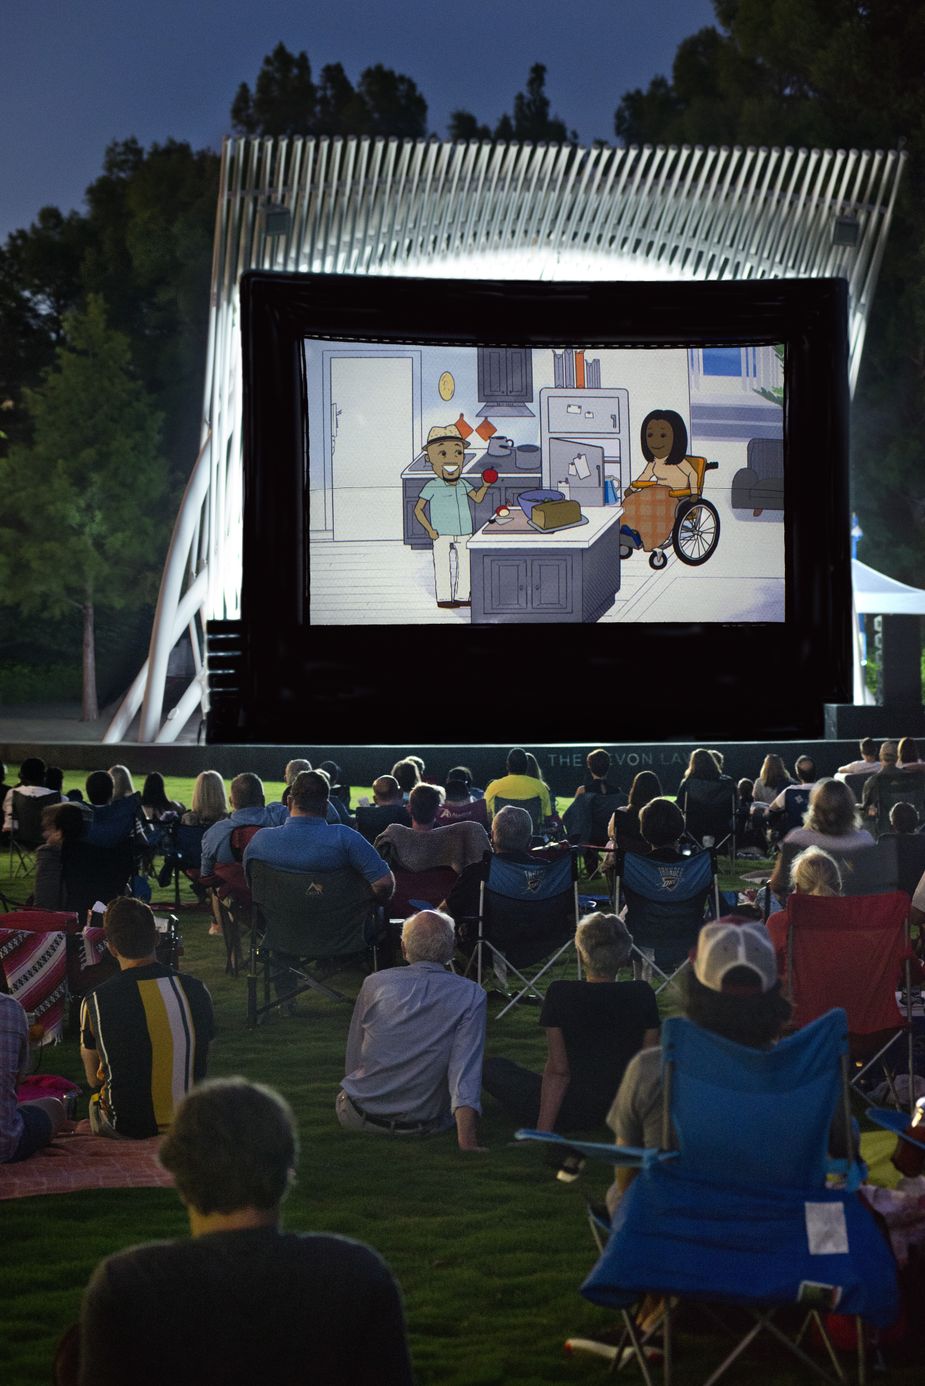 In years past, hundreds of visitors brought lawn chairs, blankets, and coolers for an evening of free films under the stars at the Devon Lawn at Myriad Botanical Gardens. Photo by John Jernigan